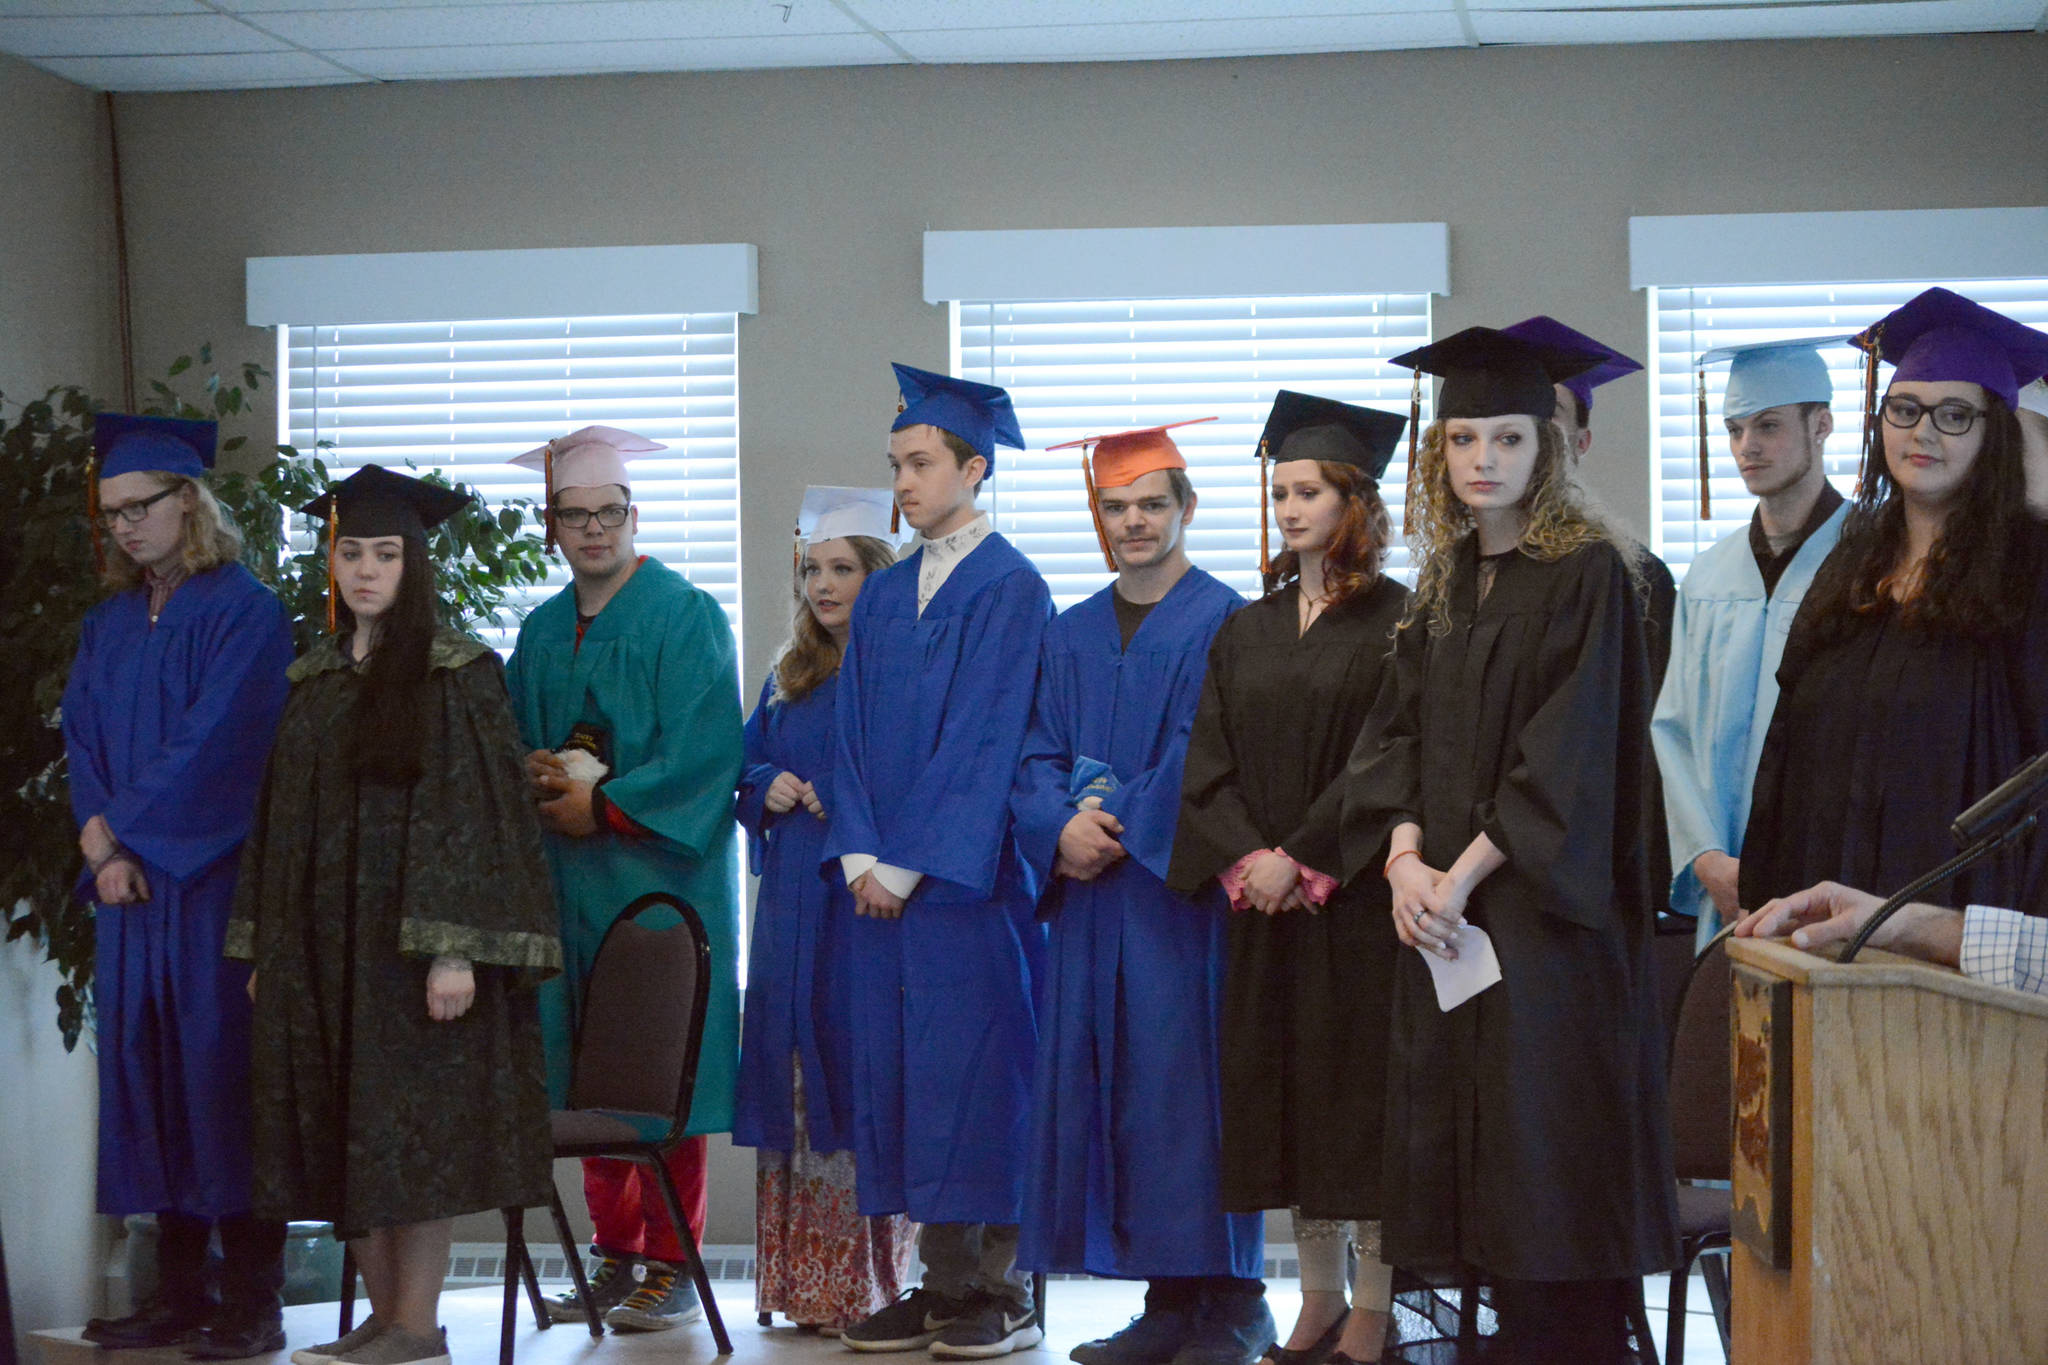 Flex School graduates stand before the start of graduation ceremonies on Wednesday, May 22, 2019, at Land’s End Resort in Homer, Alaska. (Photo by Michael Armstrong/Homer News)